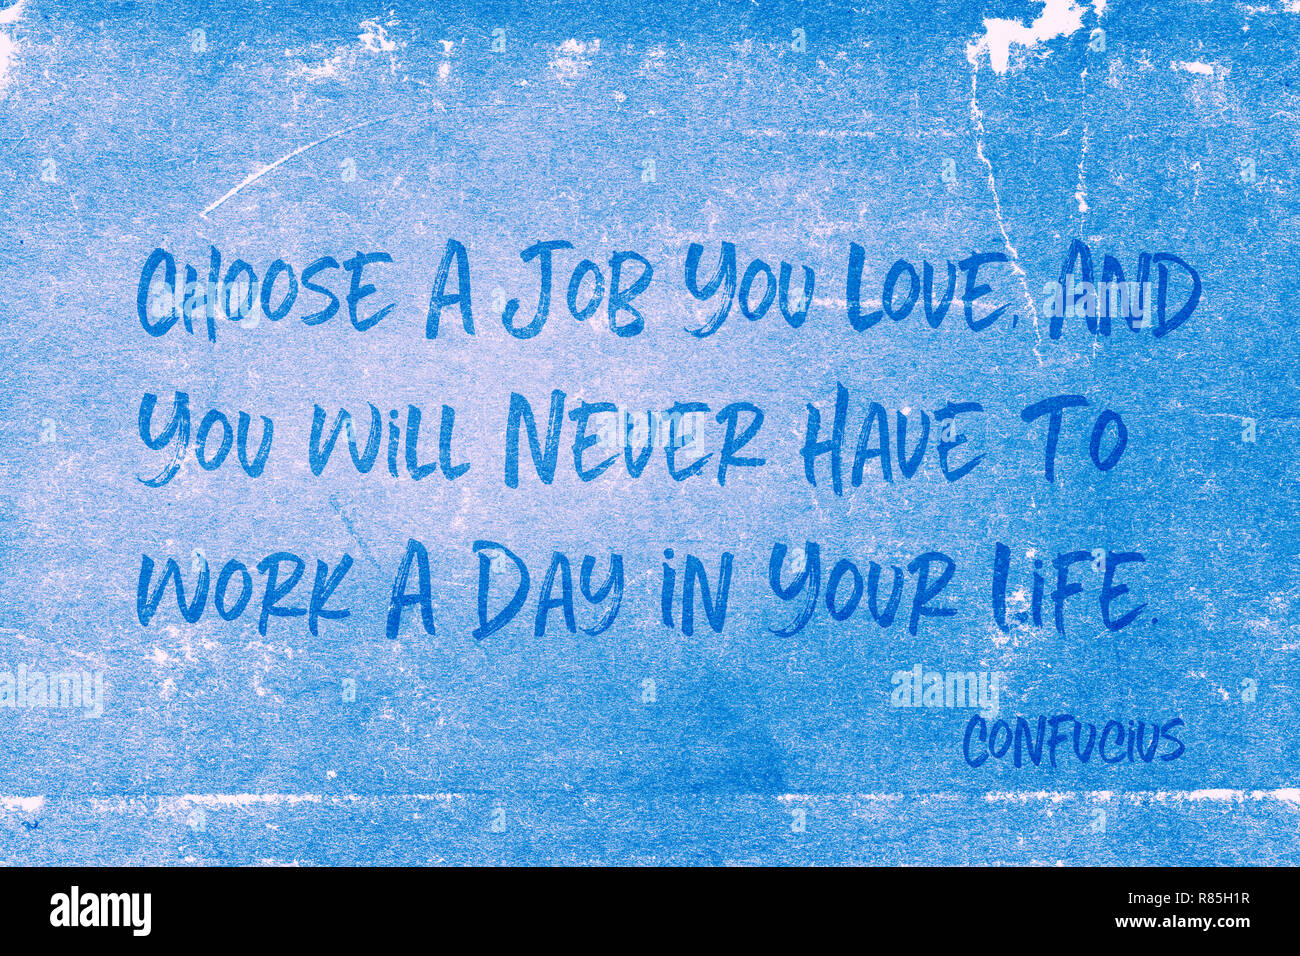 Choose a job you love, and you will never have to work a day in your life - ancient Chinese philosopher Confucius quote printed on grunge blue paper Stock Photo